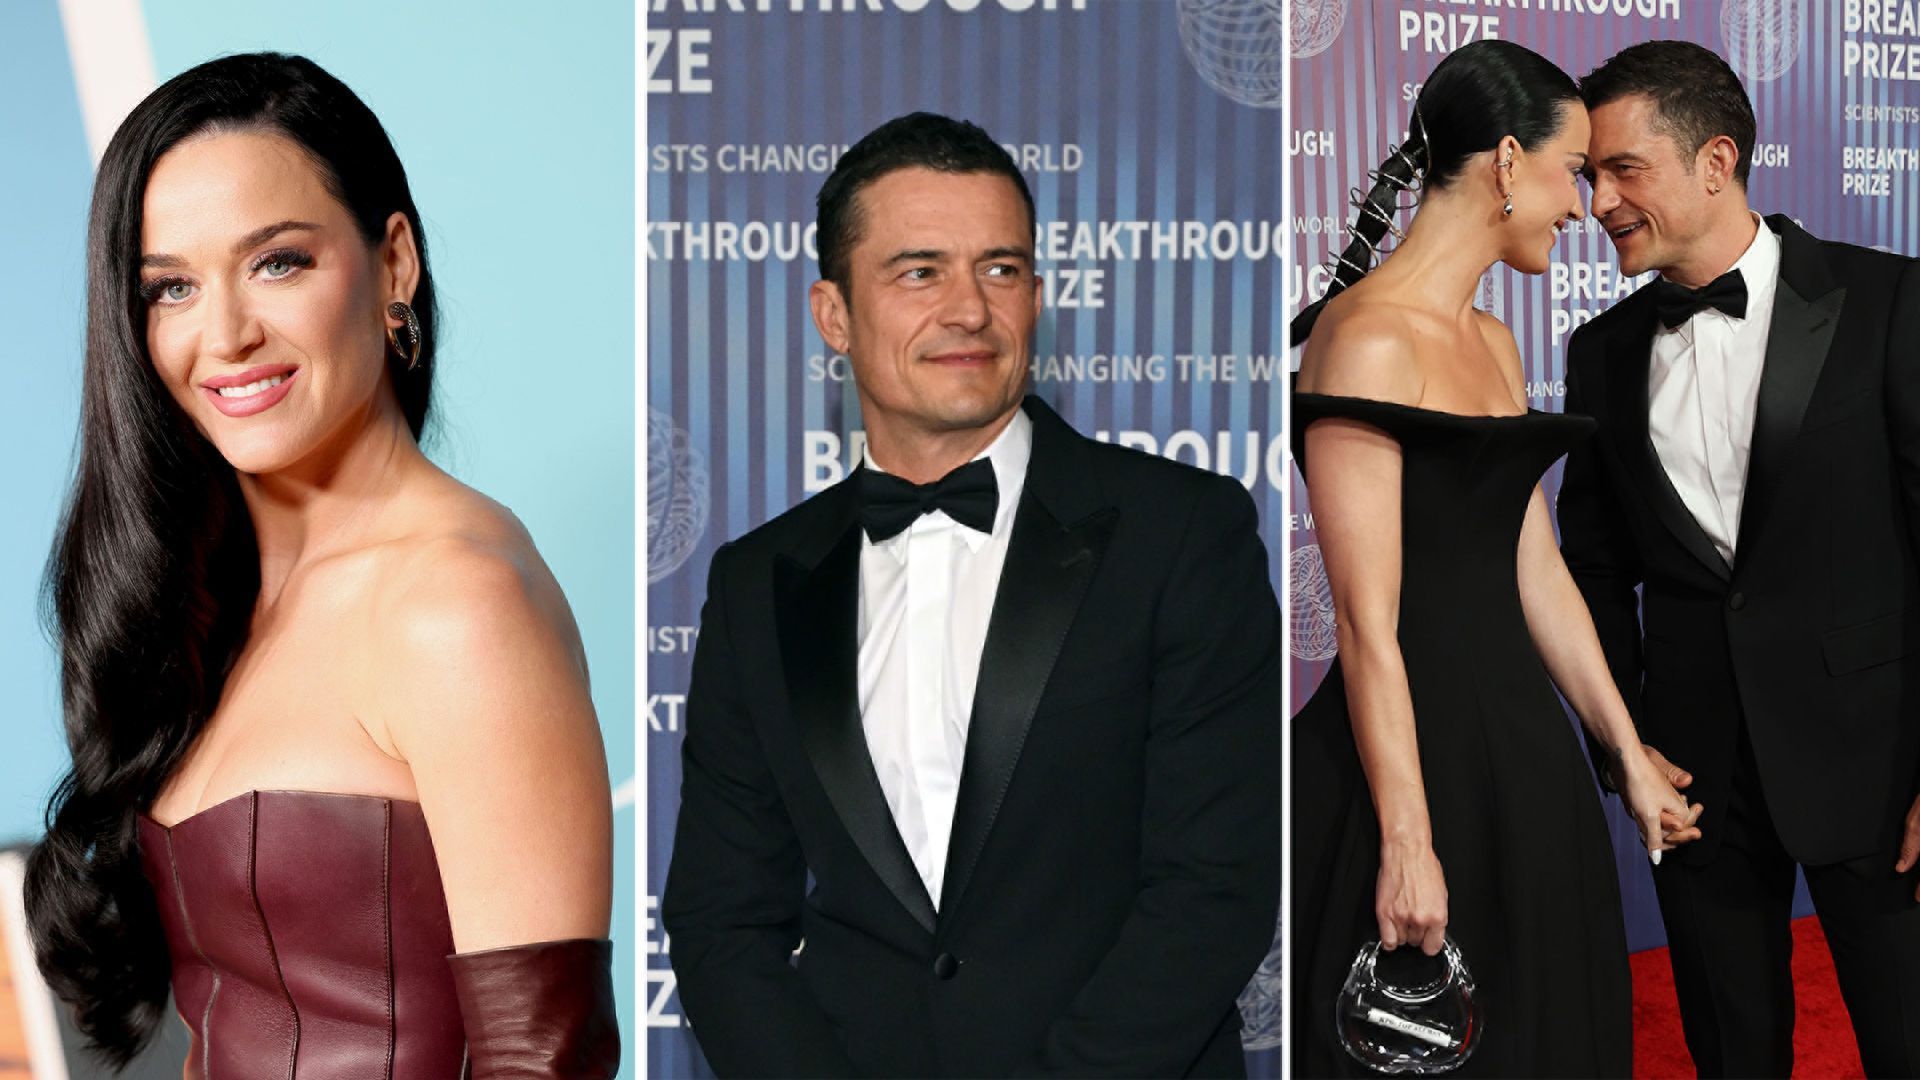 L to R: Katy Perry, Orlando Bloom, and Katy with Orlando putting their heads together on the red carpet